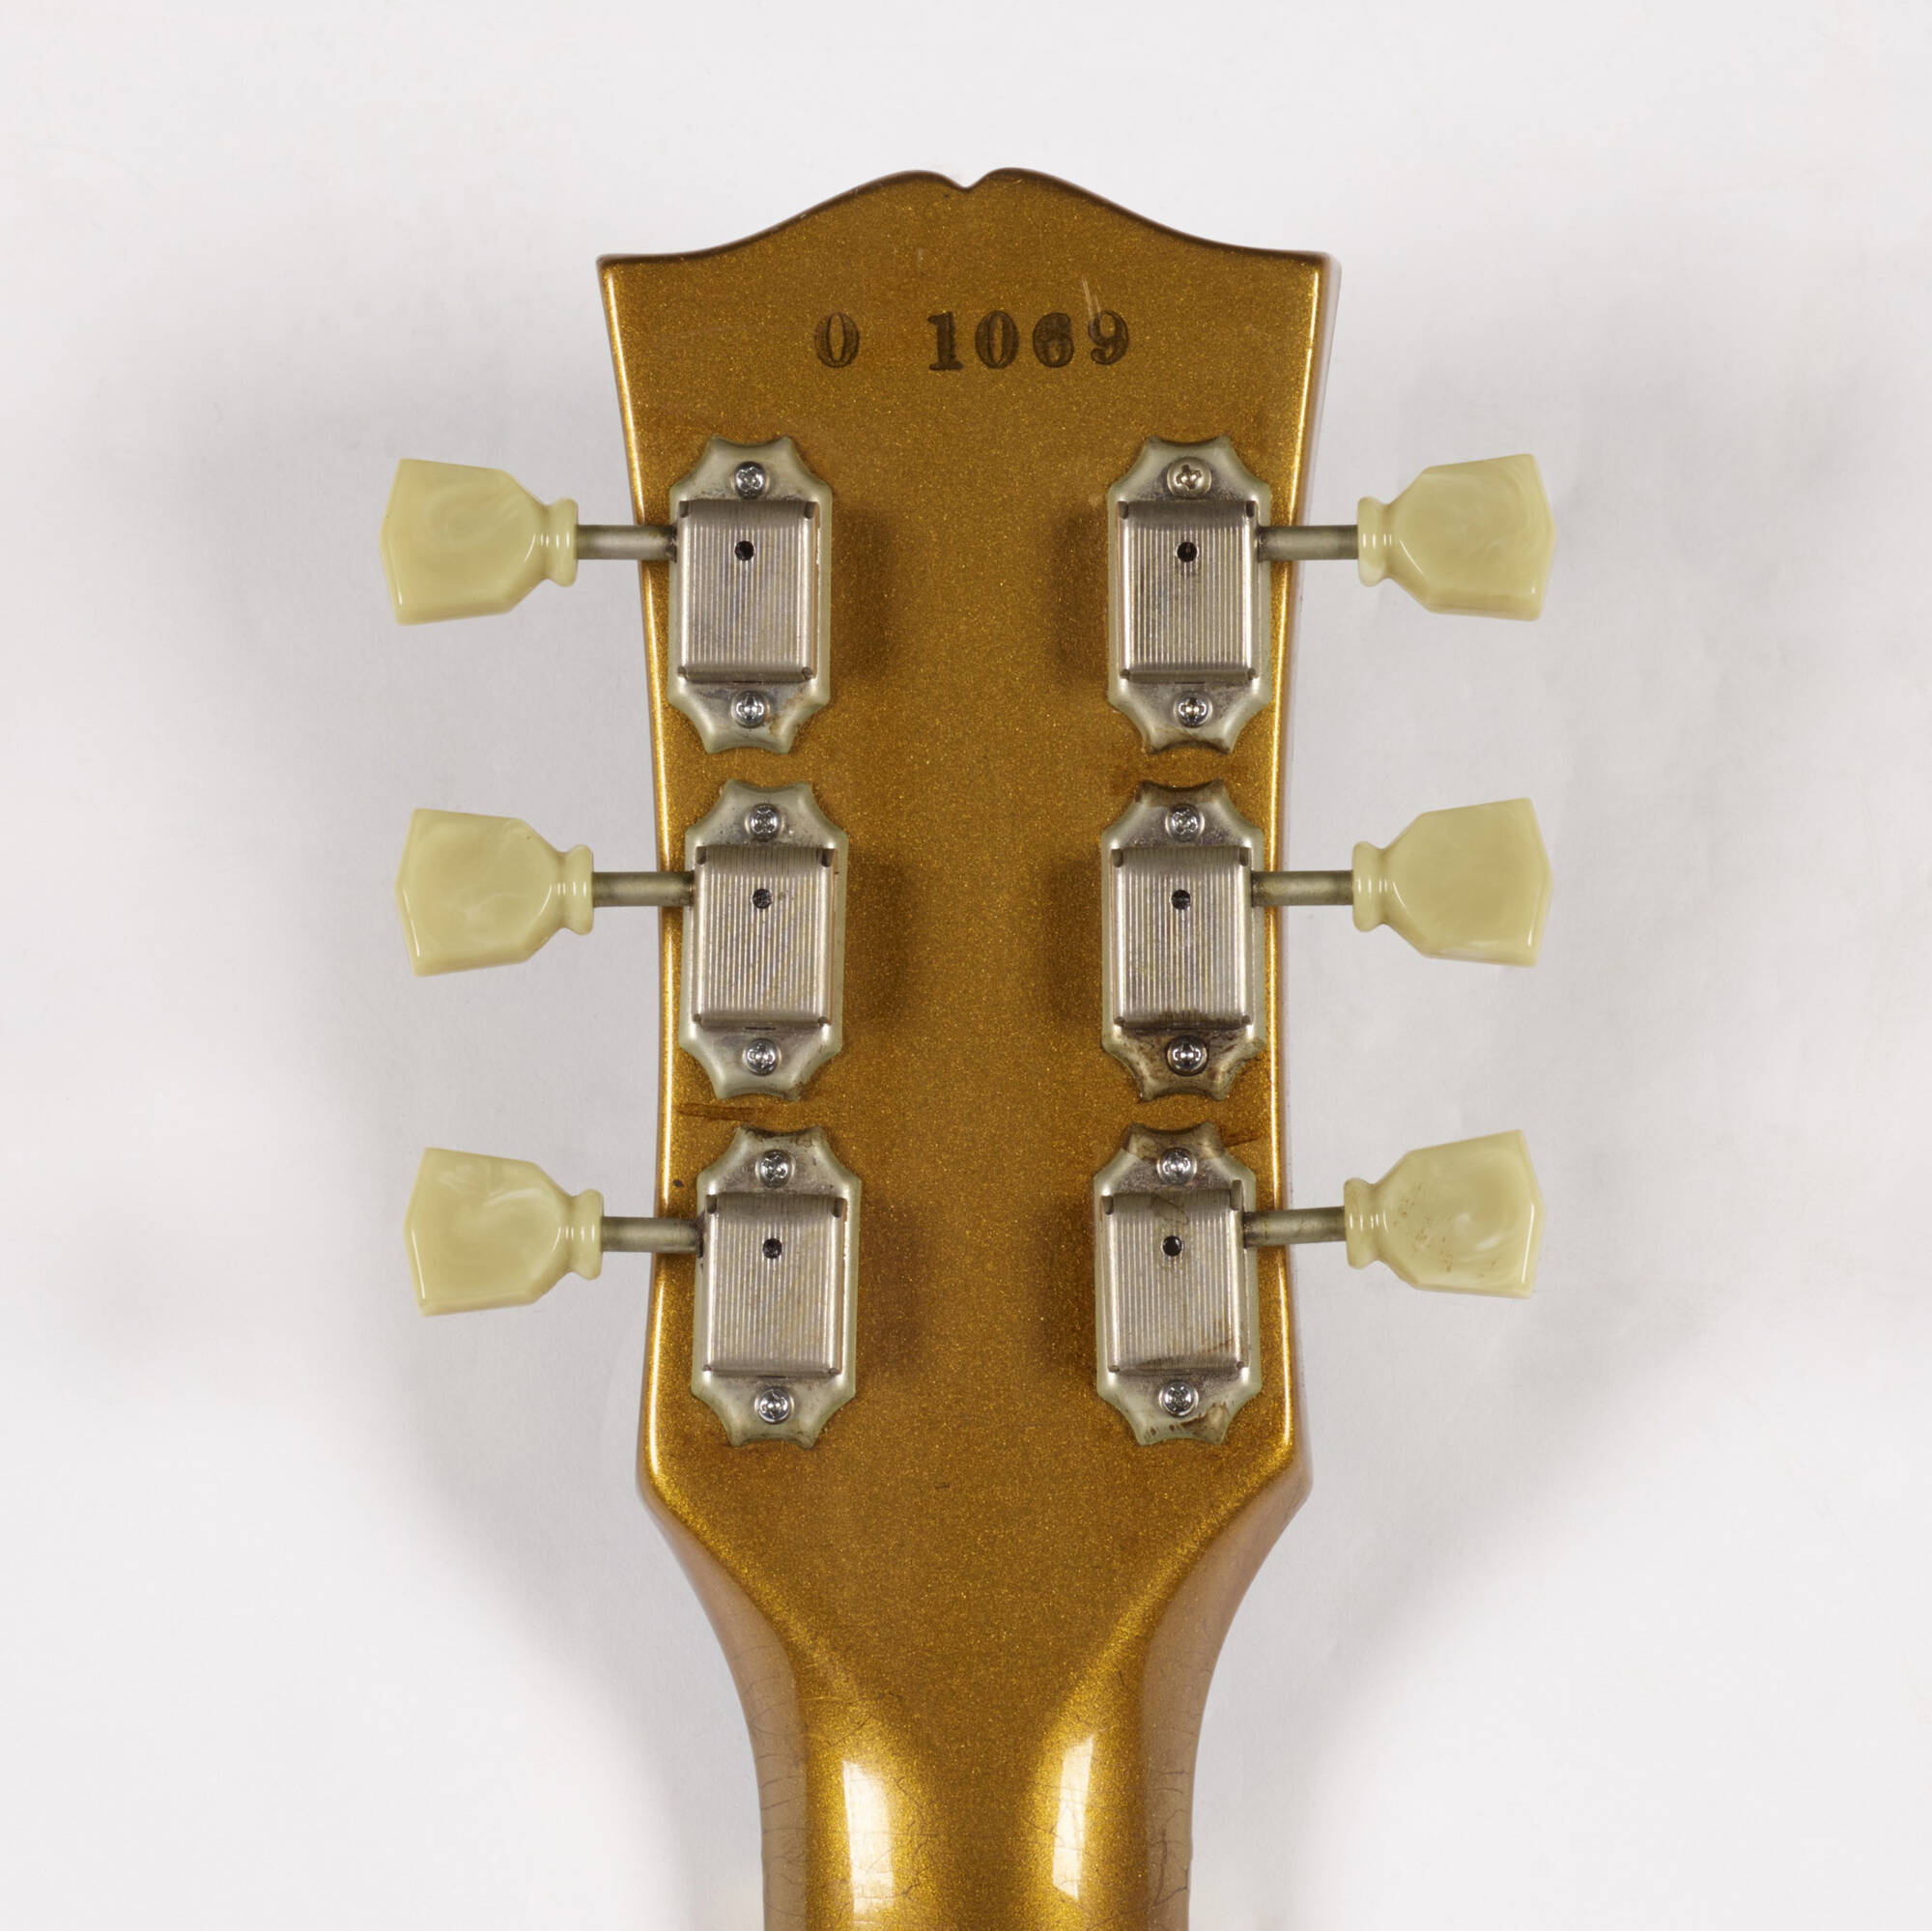 147: GIBSON, 1991 Les Paul Classic All Gold Goldtop guitar < Rock from The Boyd Collection, 27 June 2019 < Auctions | Auctions of Art and